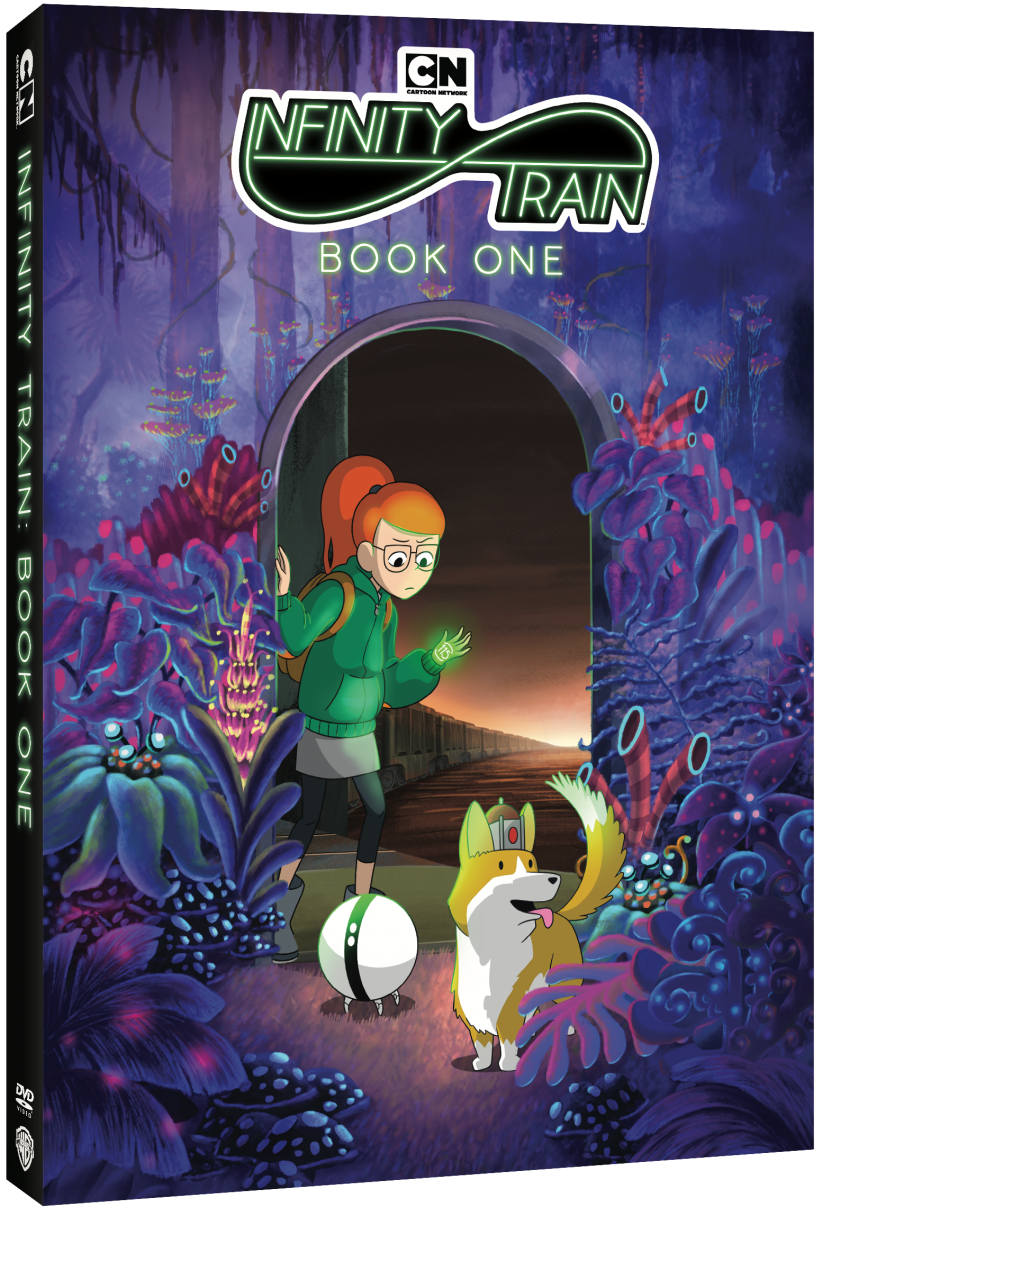 Infinity Train: Book One DVD cover (Warner Bros. Home Entertainment)